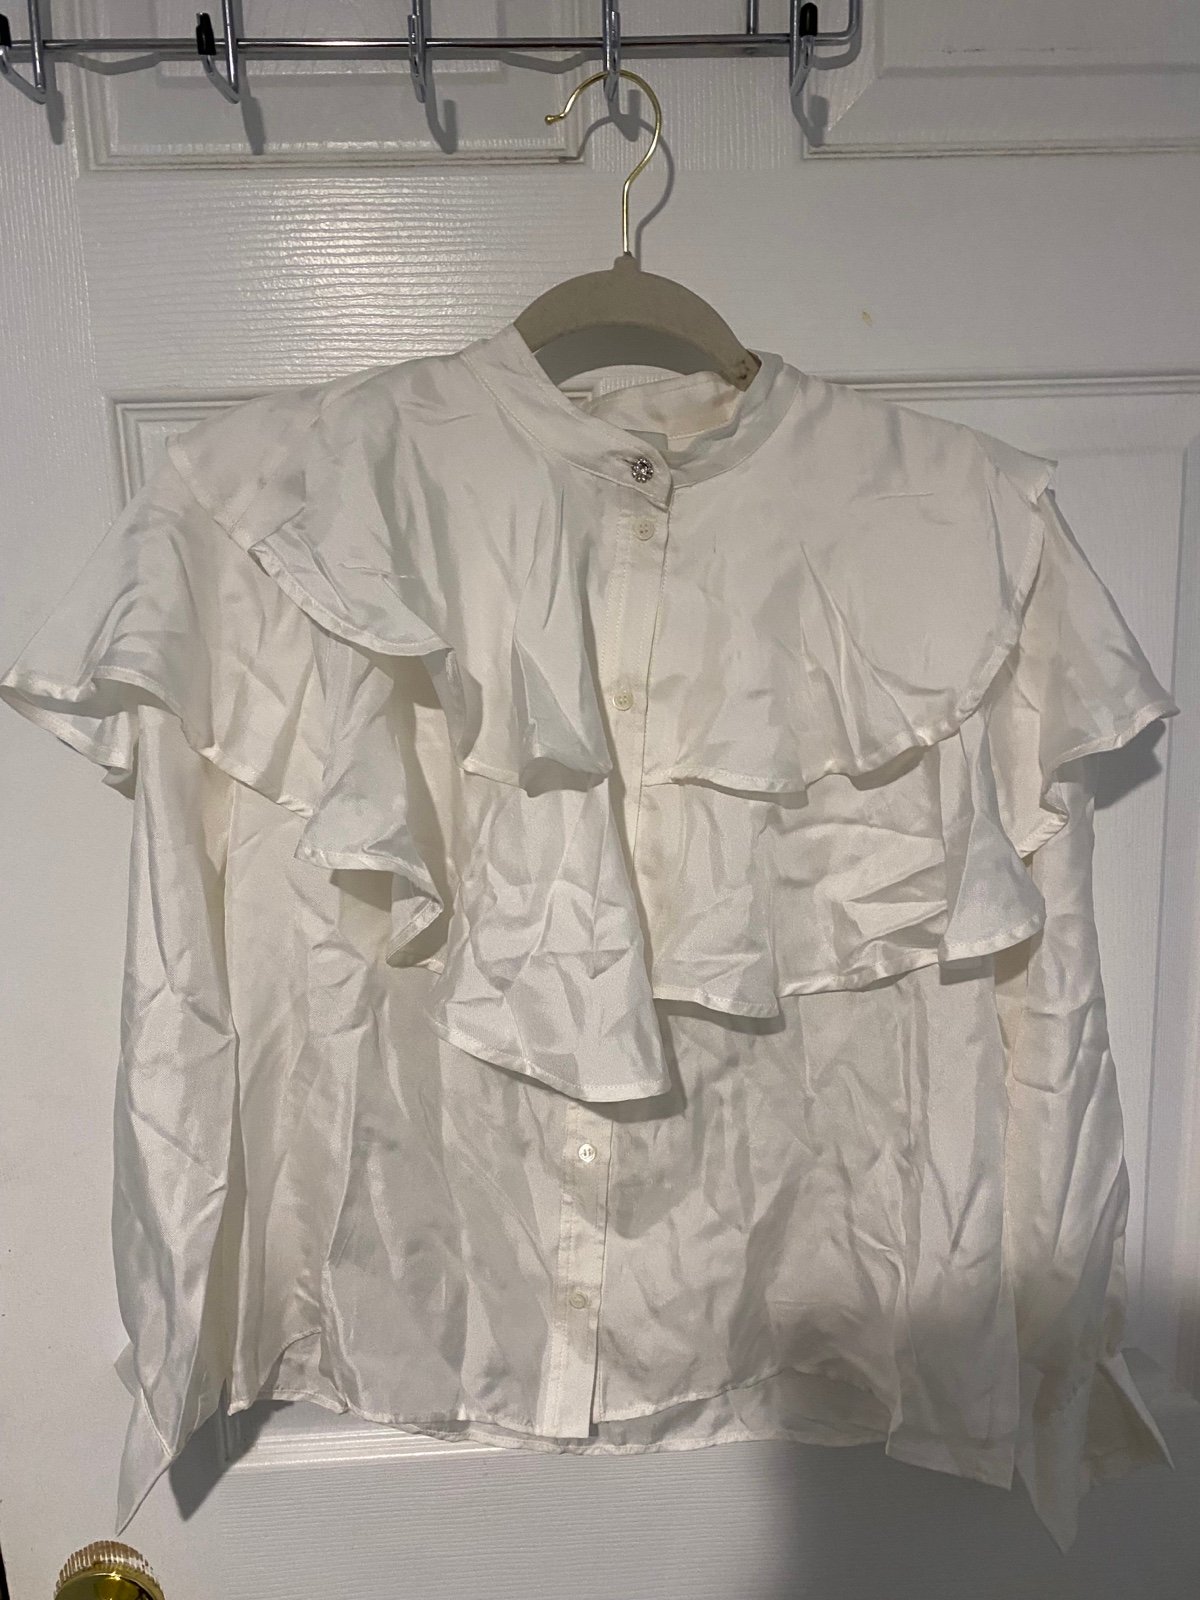 Elegant Sandro ruffle silk blouse nwt nIFf5g9y5 Outlet Store